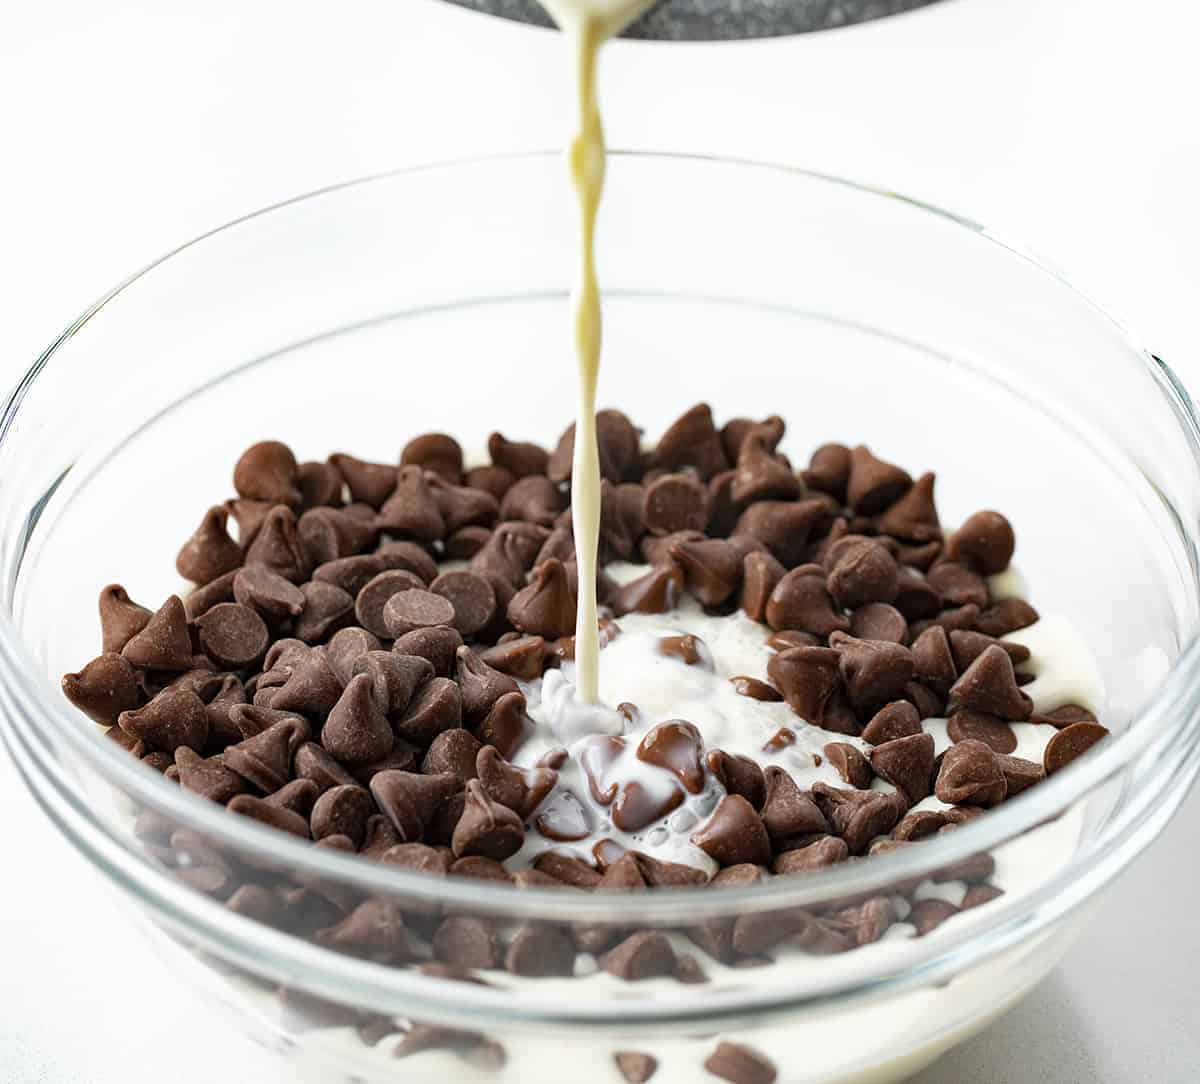 Pouring Hot Milk Over Chocolate Chips